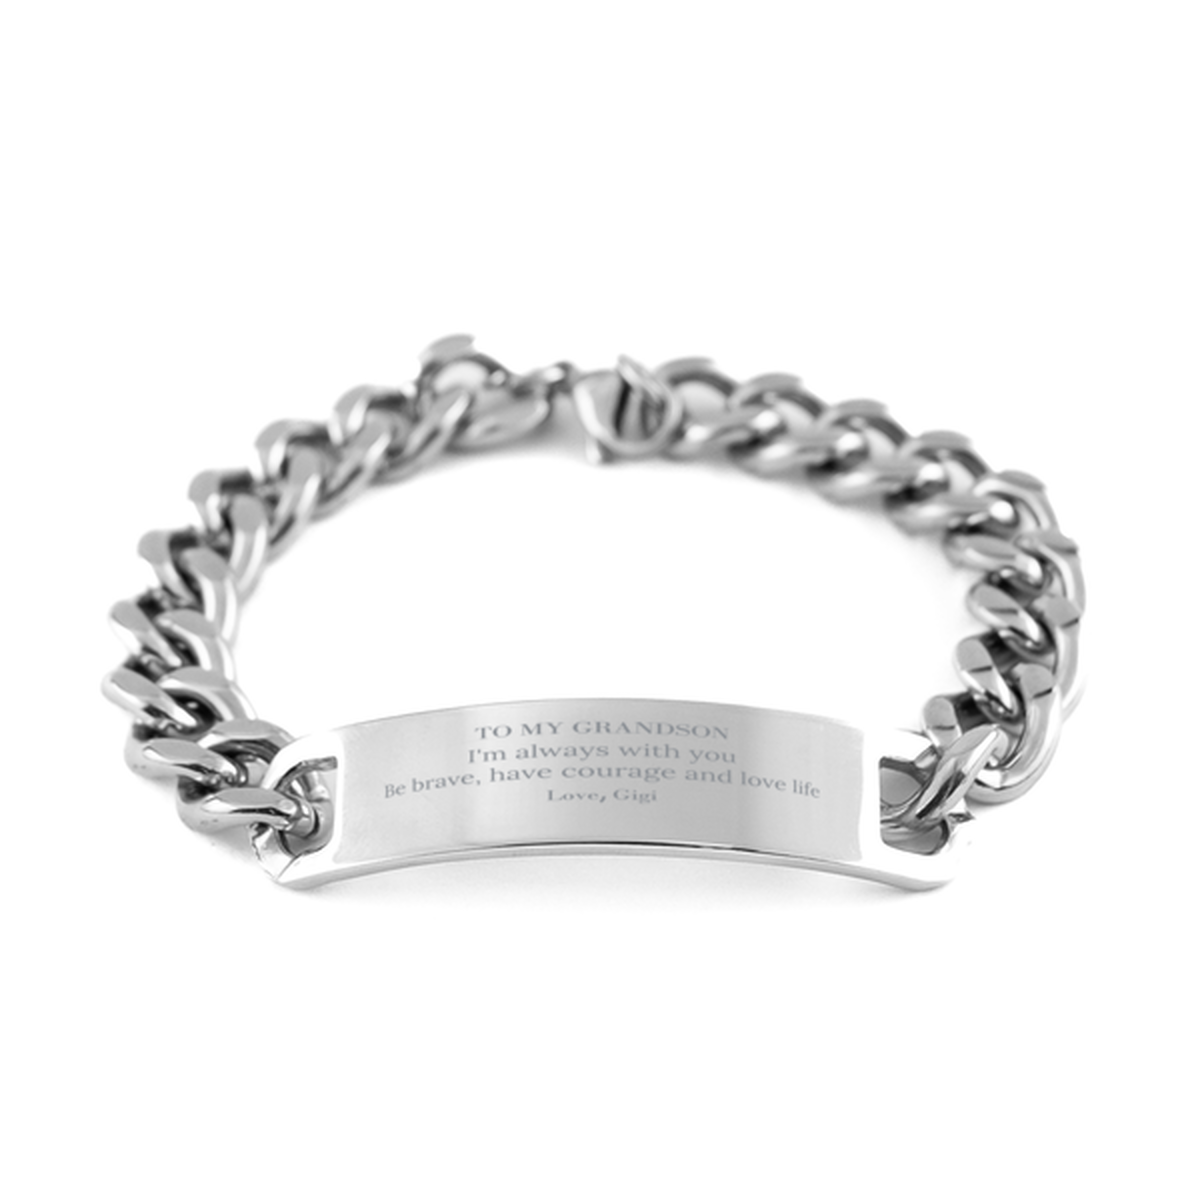 To My Grandson Gifts from Gigi, Unique Cuban Chain Stainless Steel Bracelet Inspirational Christmas Birthday Graduation Gifts for Grandson I'm always with you. Be brave, have courage and love life. Love, Gigi